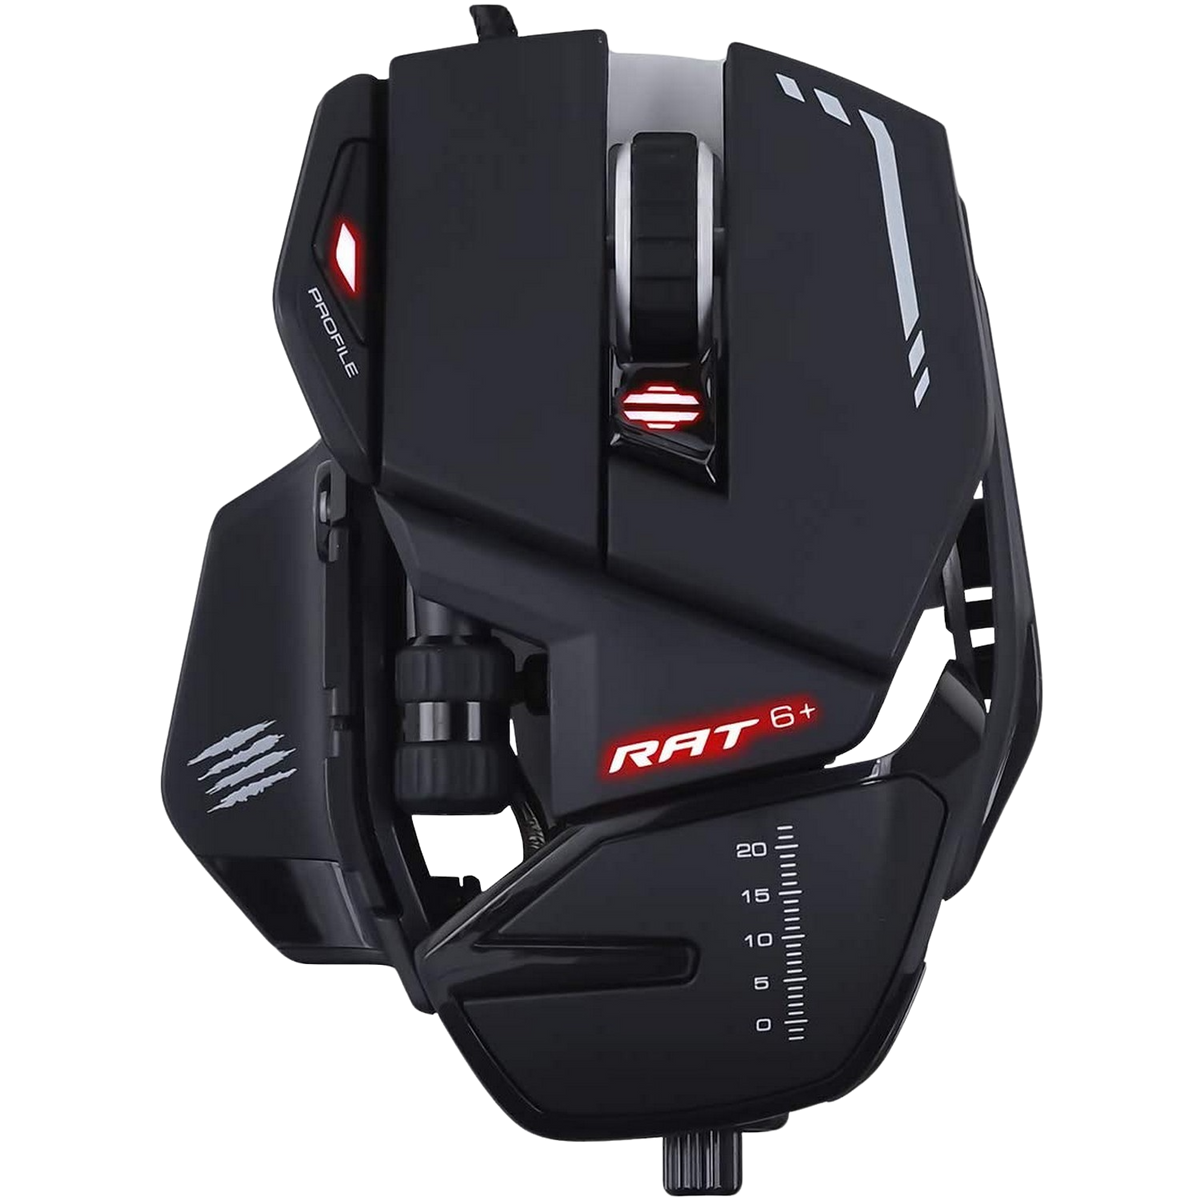 Gaming Schwarz MOUSE, GAMING R.A.T. MR04DCINBL000-0 OPTICAL CATZ 6+ Maus, MAD BL